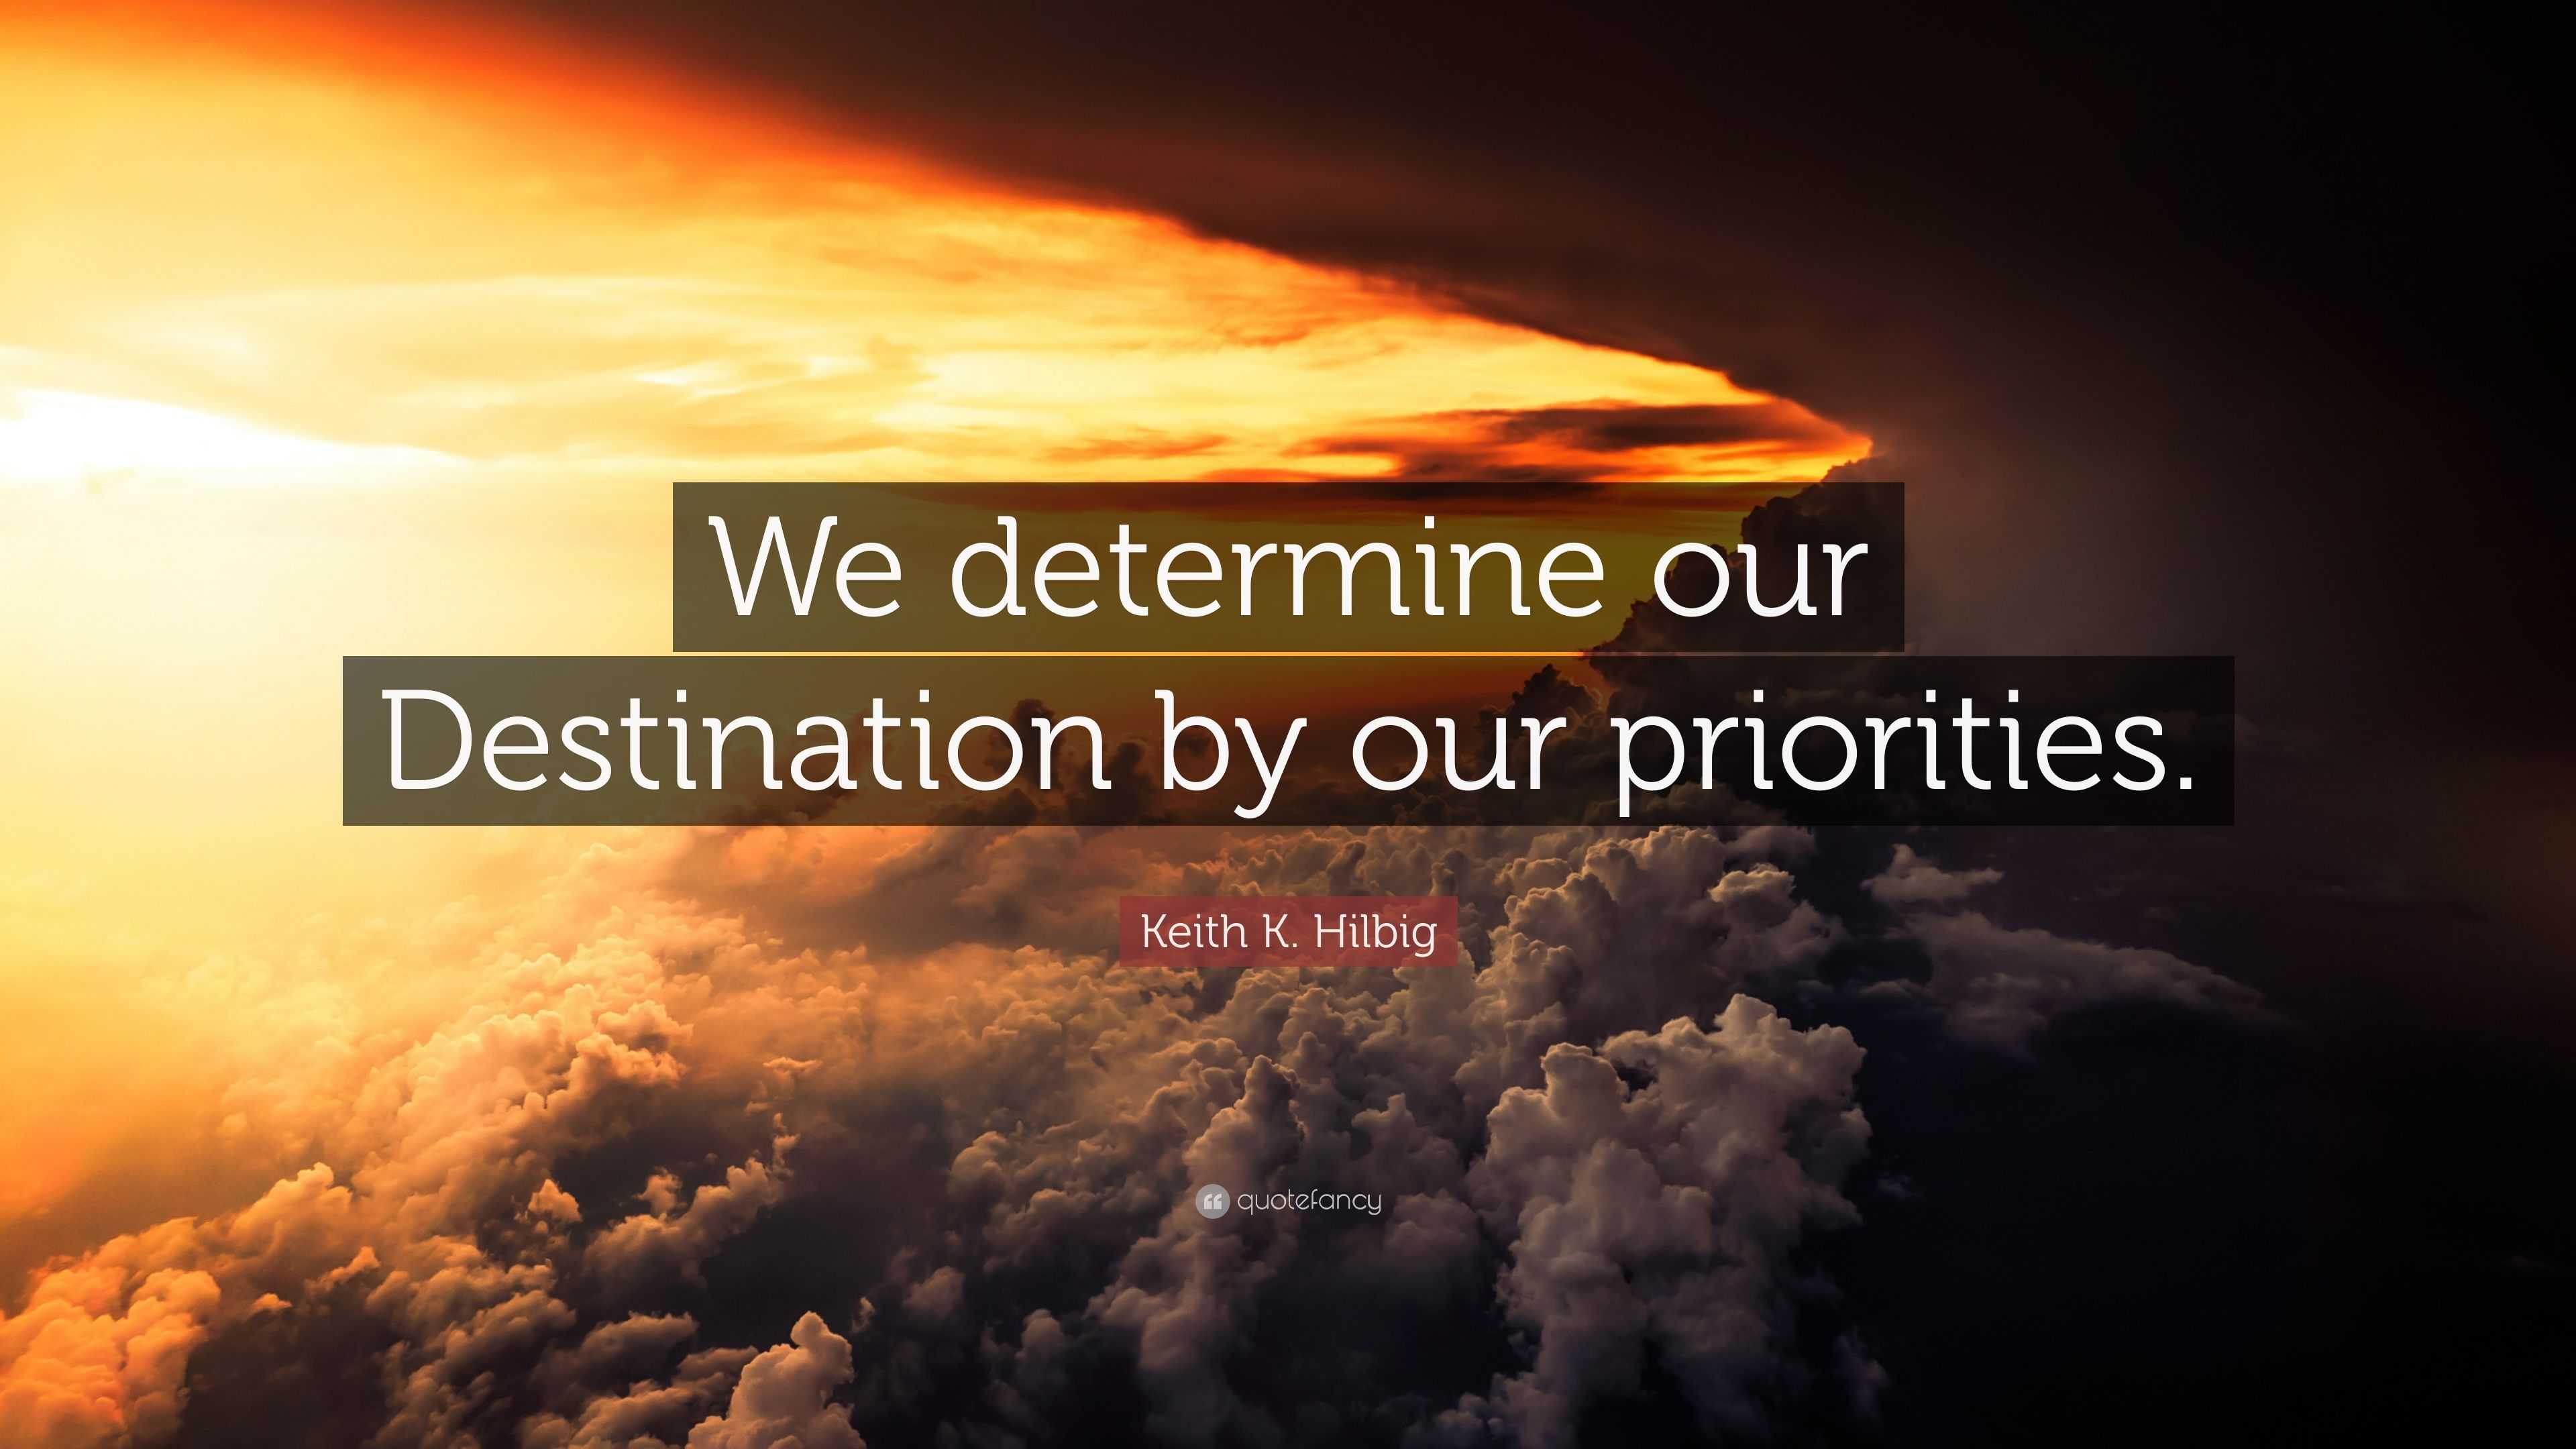 Keith K. Hilbig Quote “We determine our Destination by our priorities.”